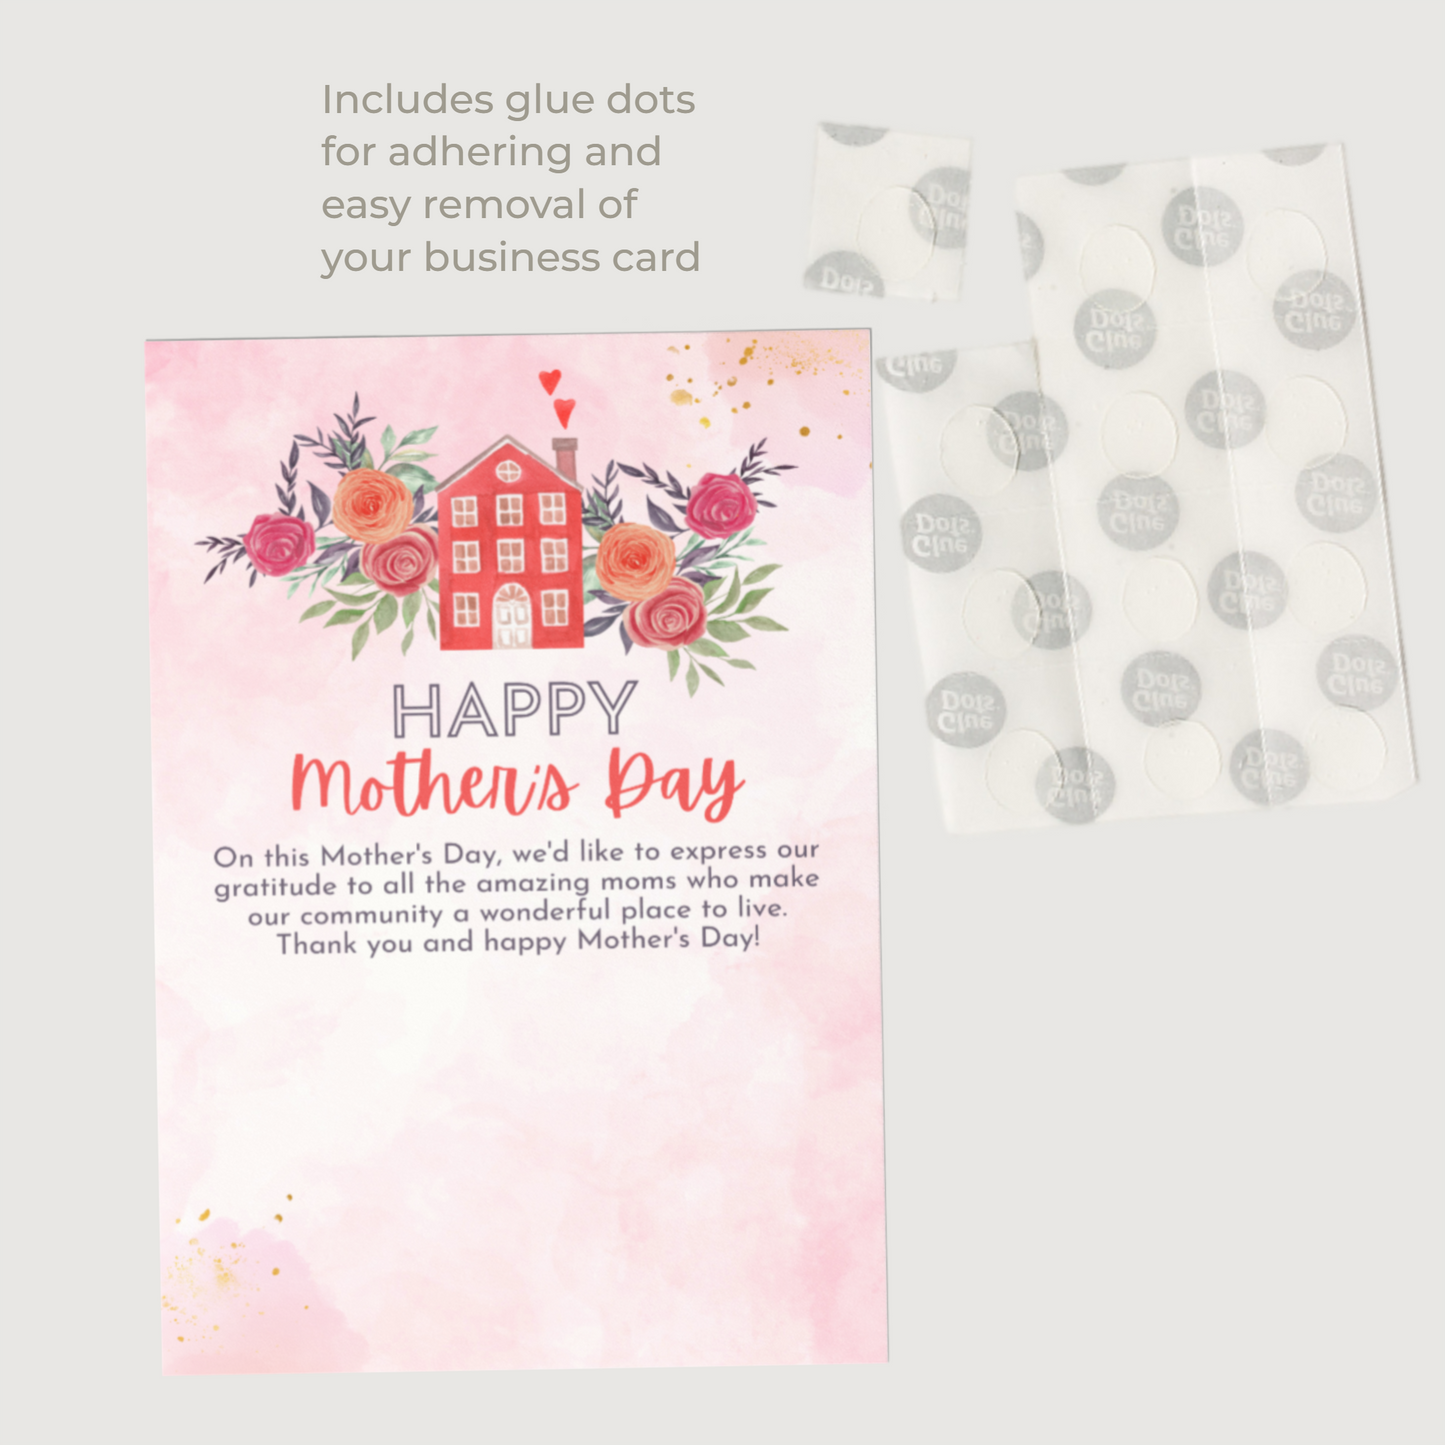 Happy Mother's Day - Set of Mother's Day Real Estate Postcard Mailers